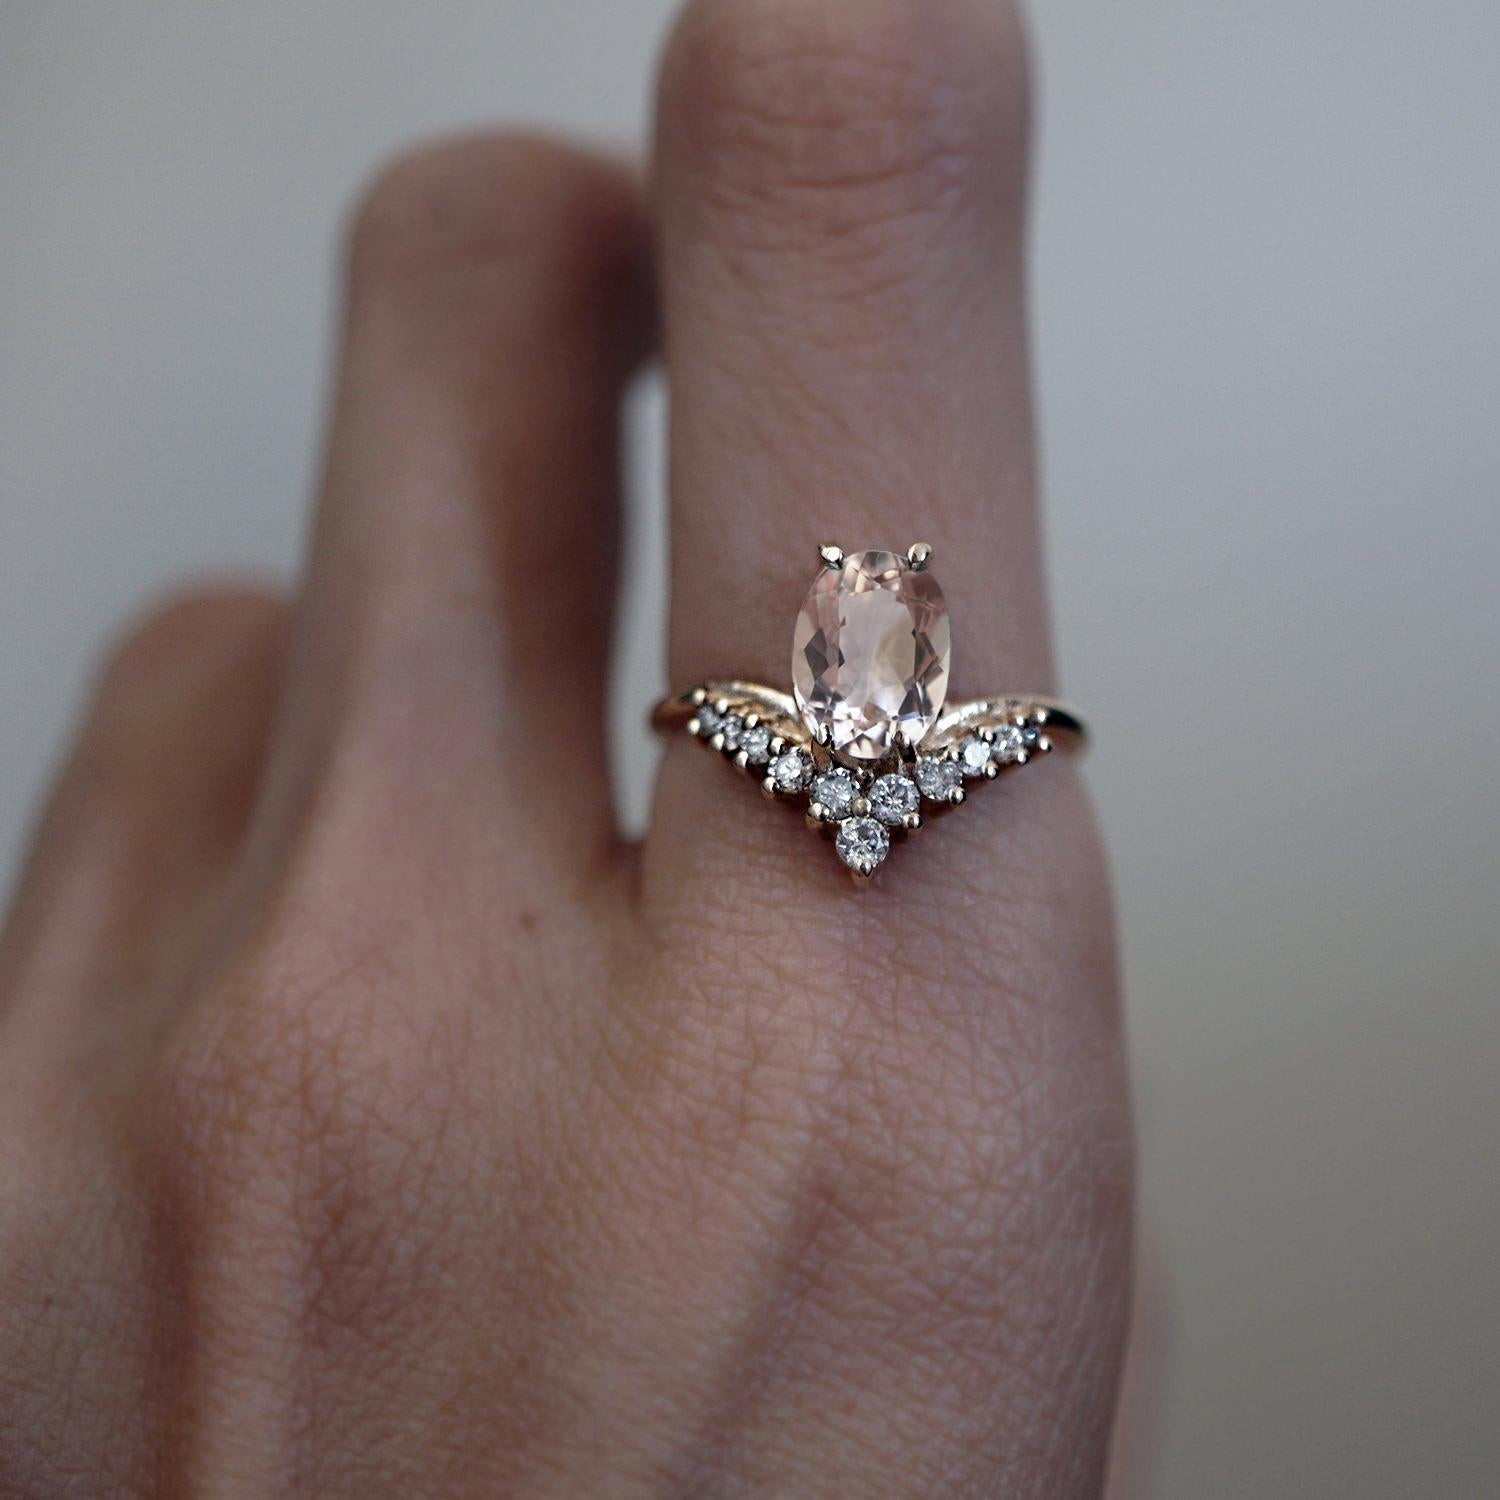 ** This item is specially made for you . Please allow 2-3 week lead time. Include ring size during checkout.

An exquisite natural peachy morganite ring made for the lovers of beauty and simplicity. This magnificent stunner glitters under the summer